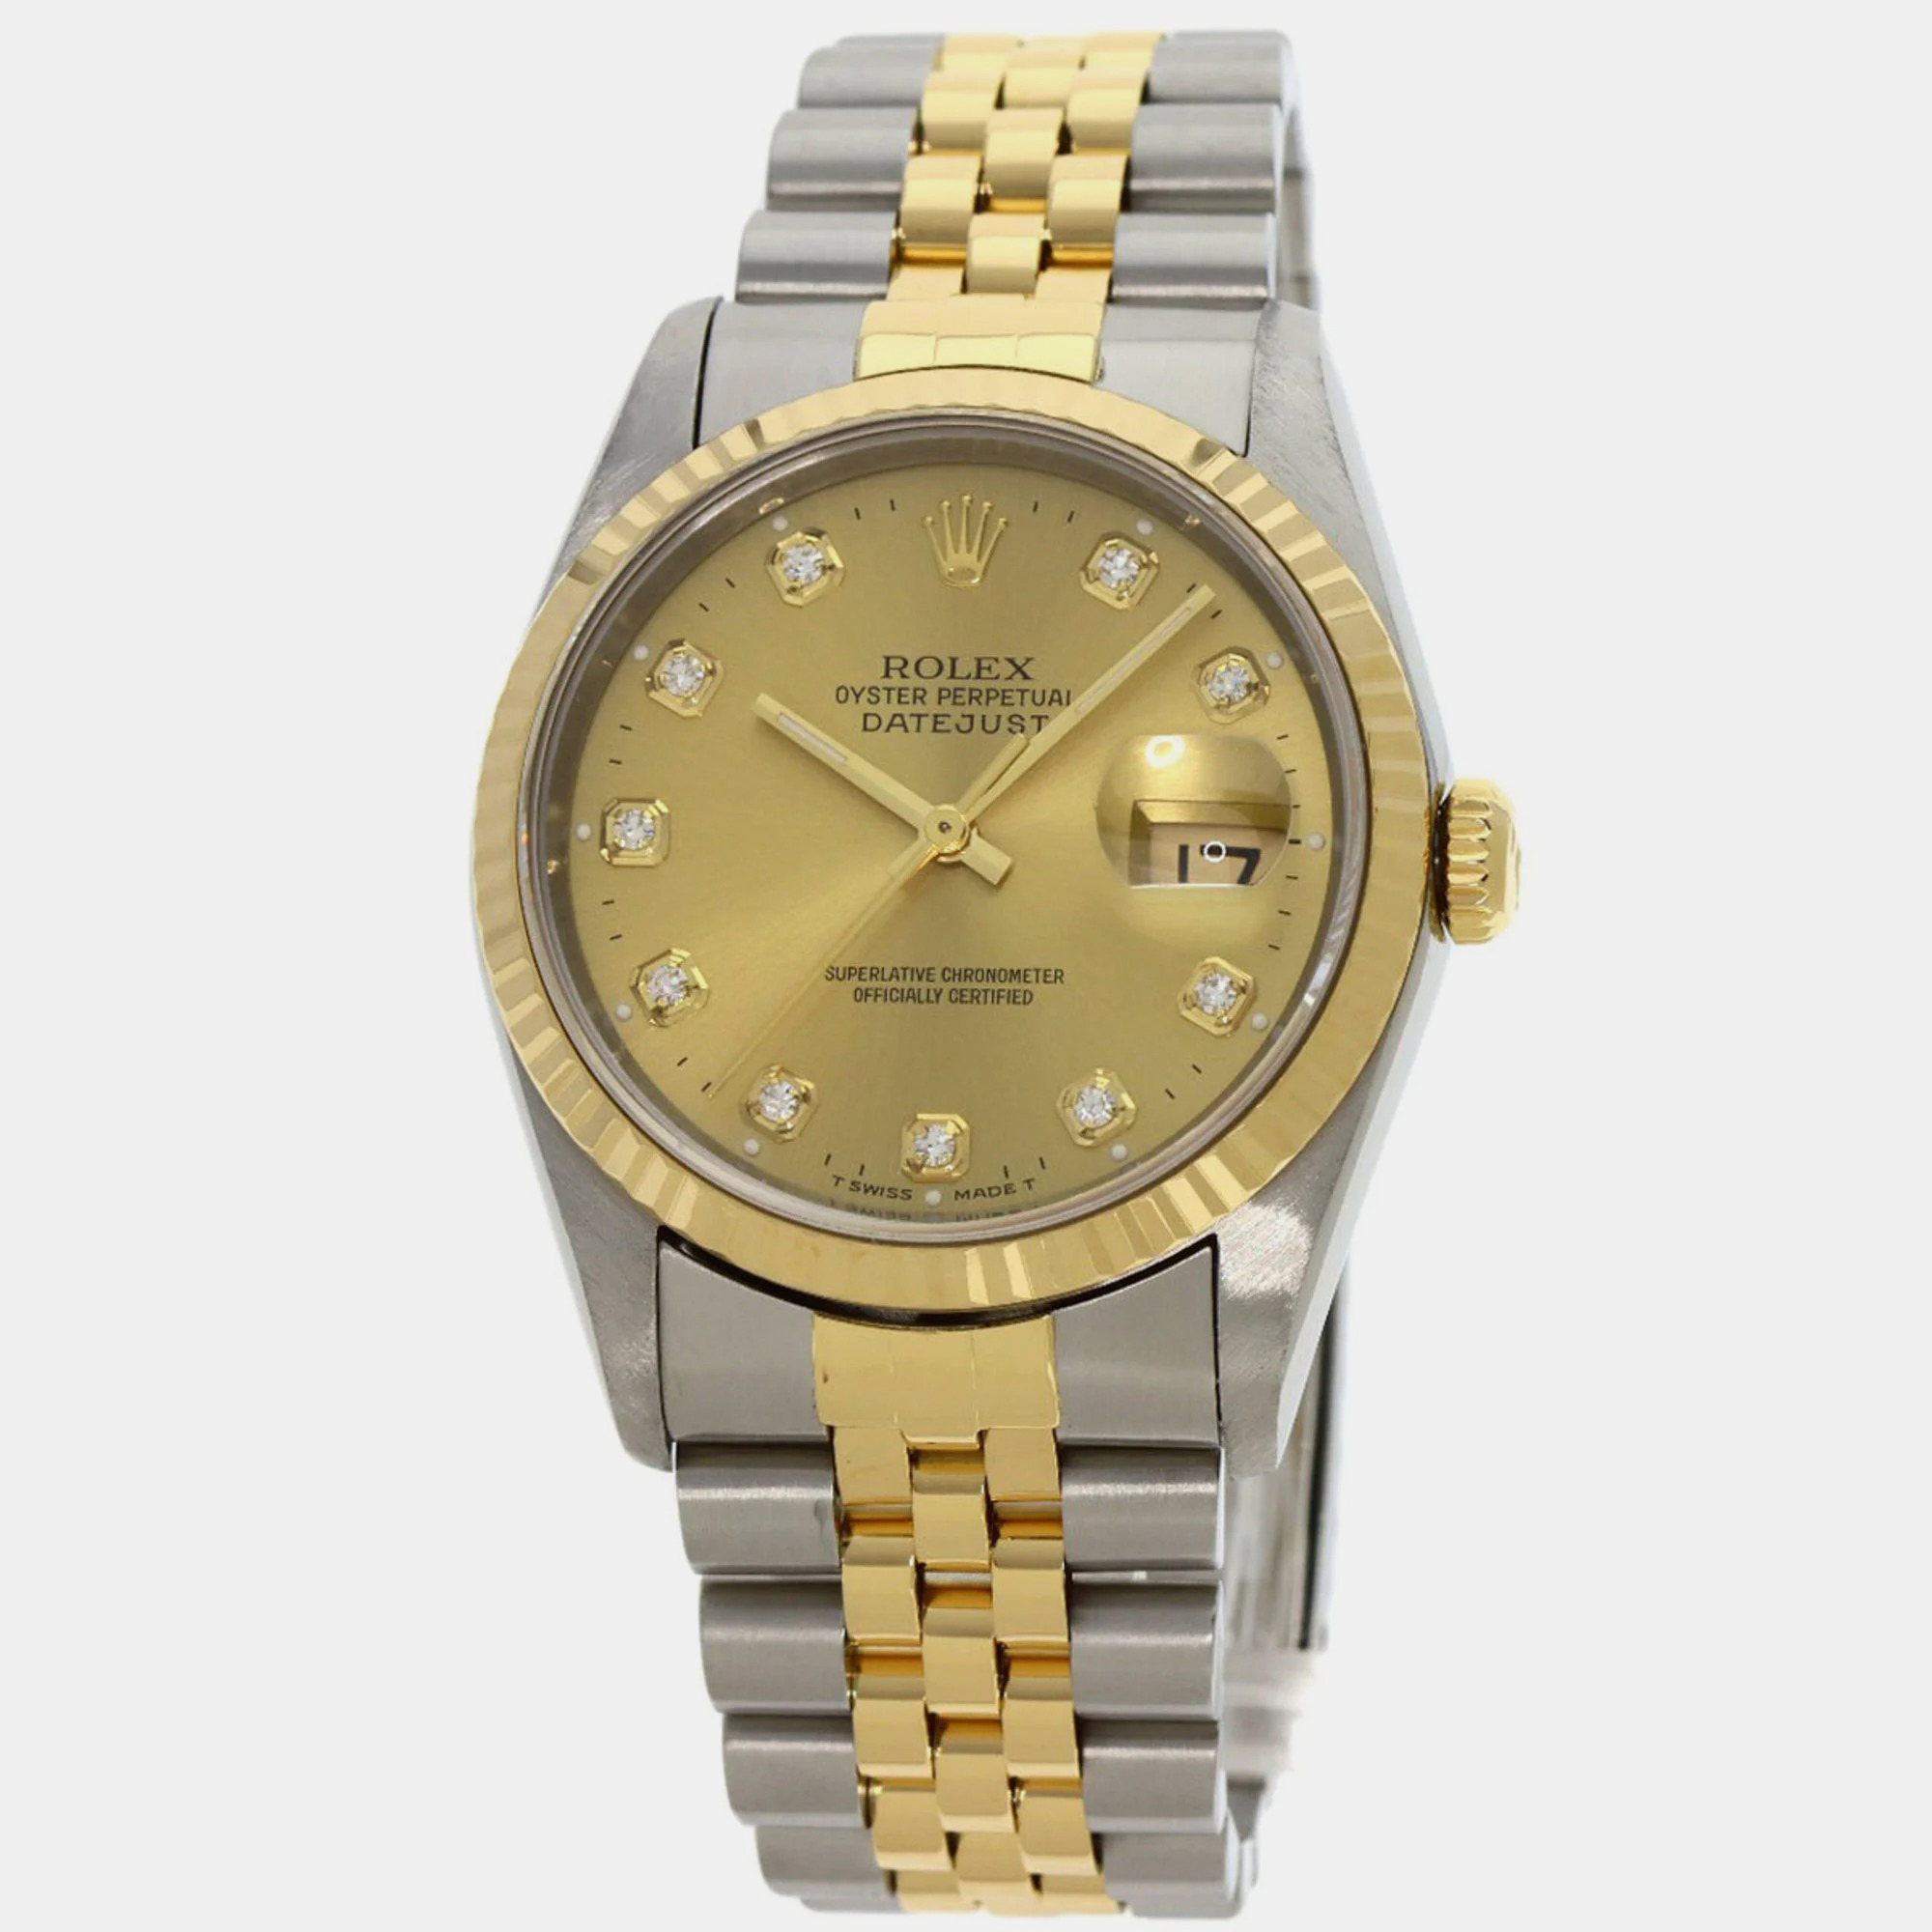 Rolex Champagne Diamond 18k Yellow Gold And Stainless Steel Datejust 16233 Automatic Men's Wristwatch 36 Mm